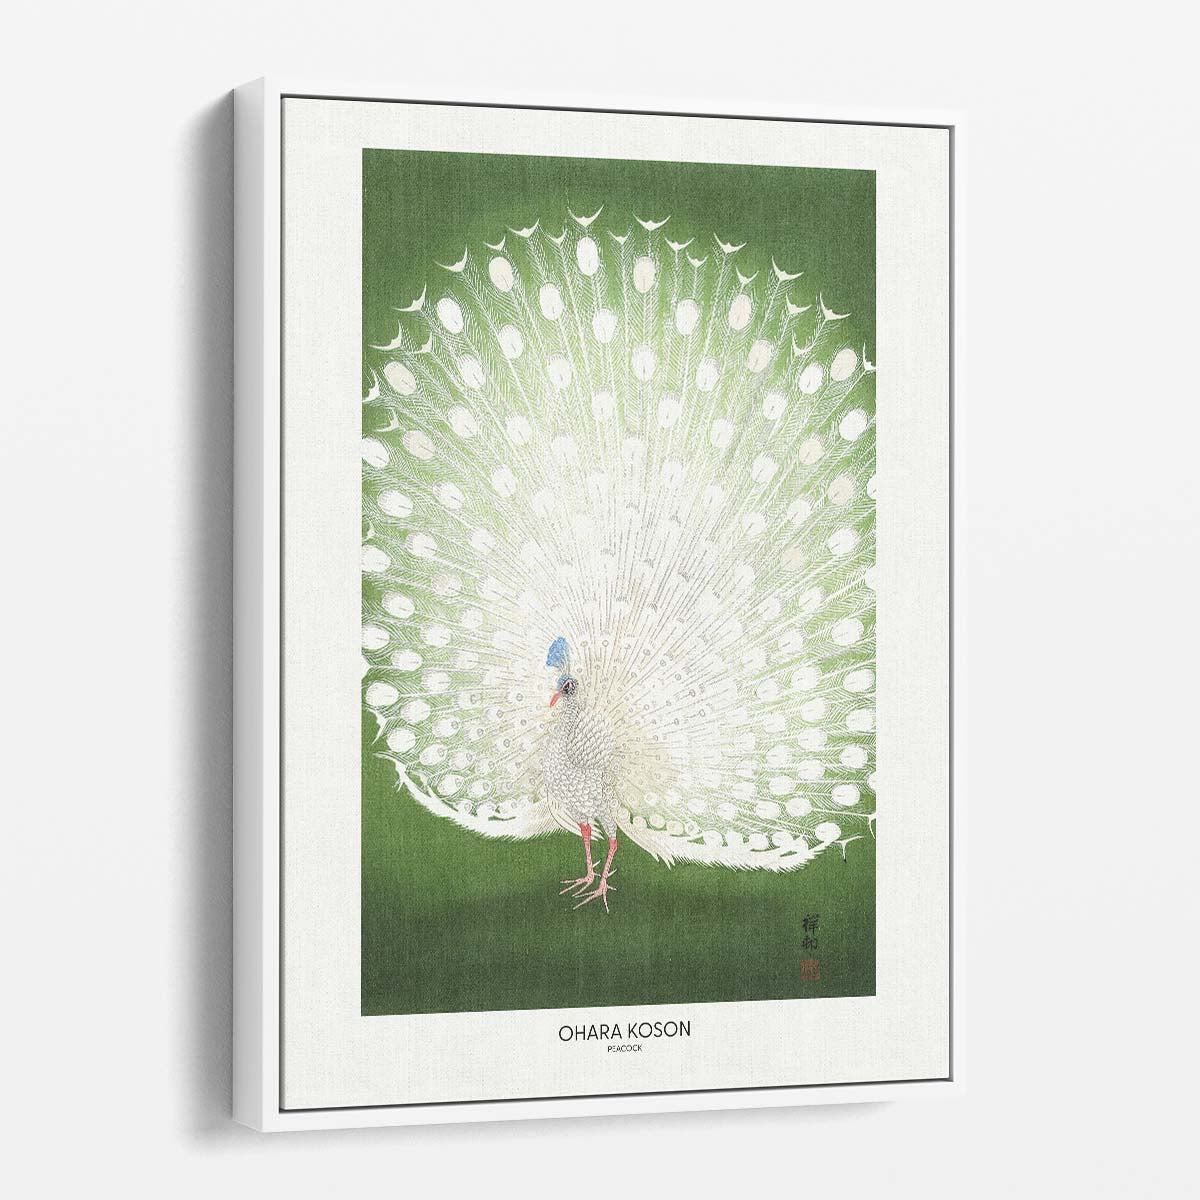 Vintage Japanese Peacock Illustration by Master Artist Ohara Koson by Luxuriance Designs, made in USA